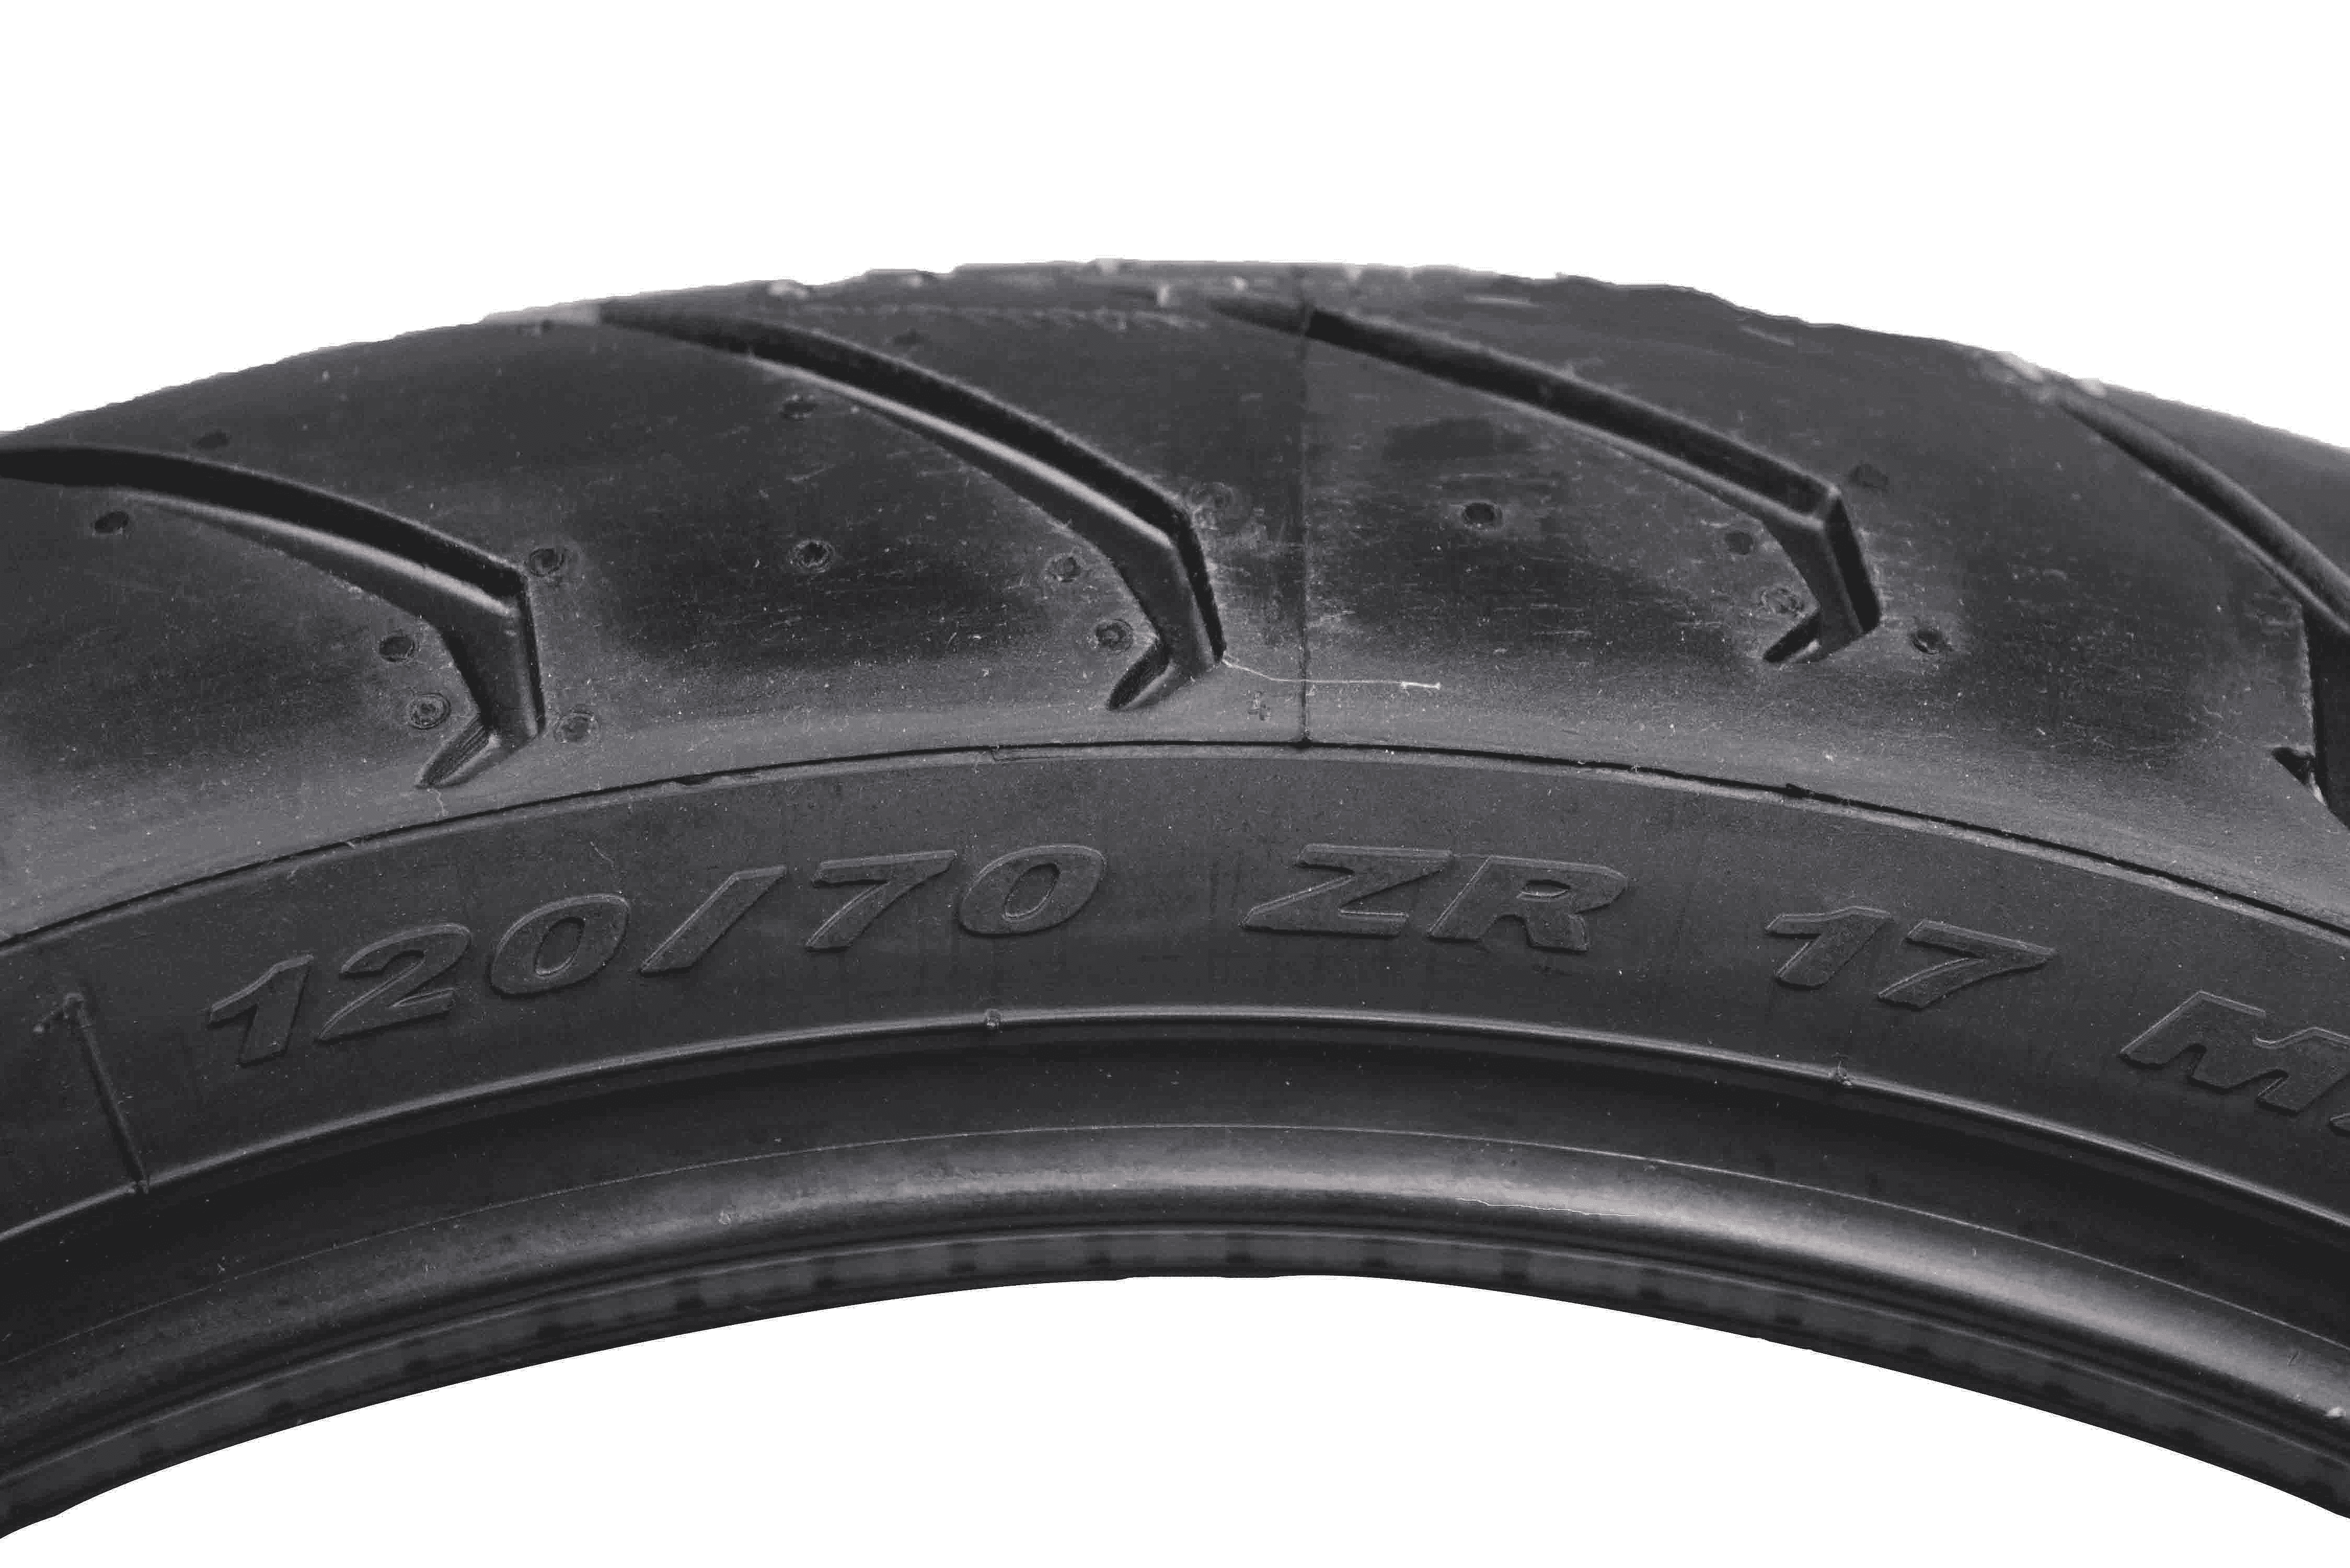 1x Front 120/70ZR17 1x Rear 160/60ZR17 Pirelli Angel ST Front & Rear Street Sport Touring Motorcycle Tires 